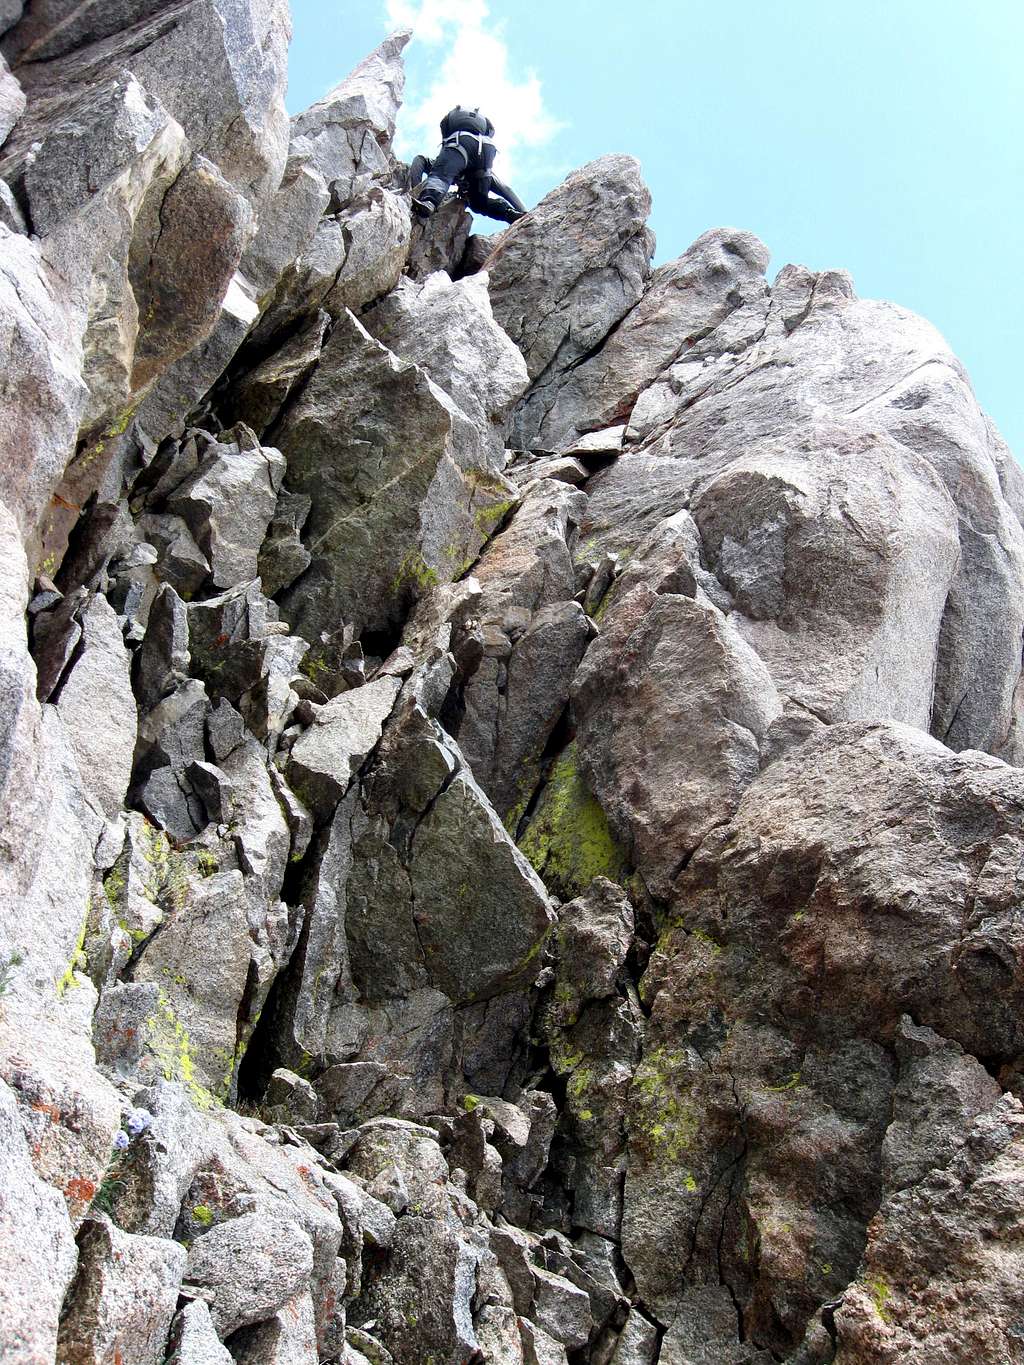 Downclimbing the crux chimney